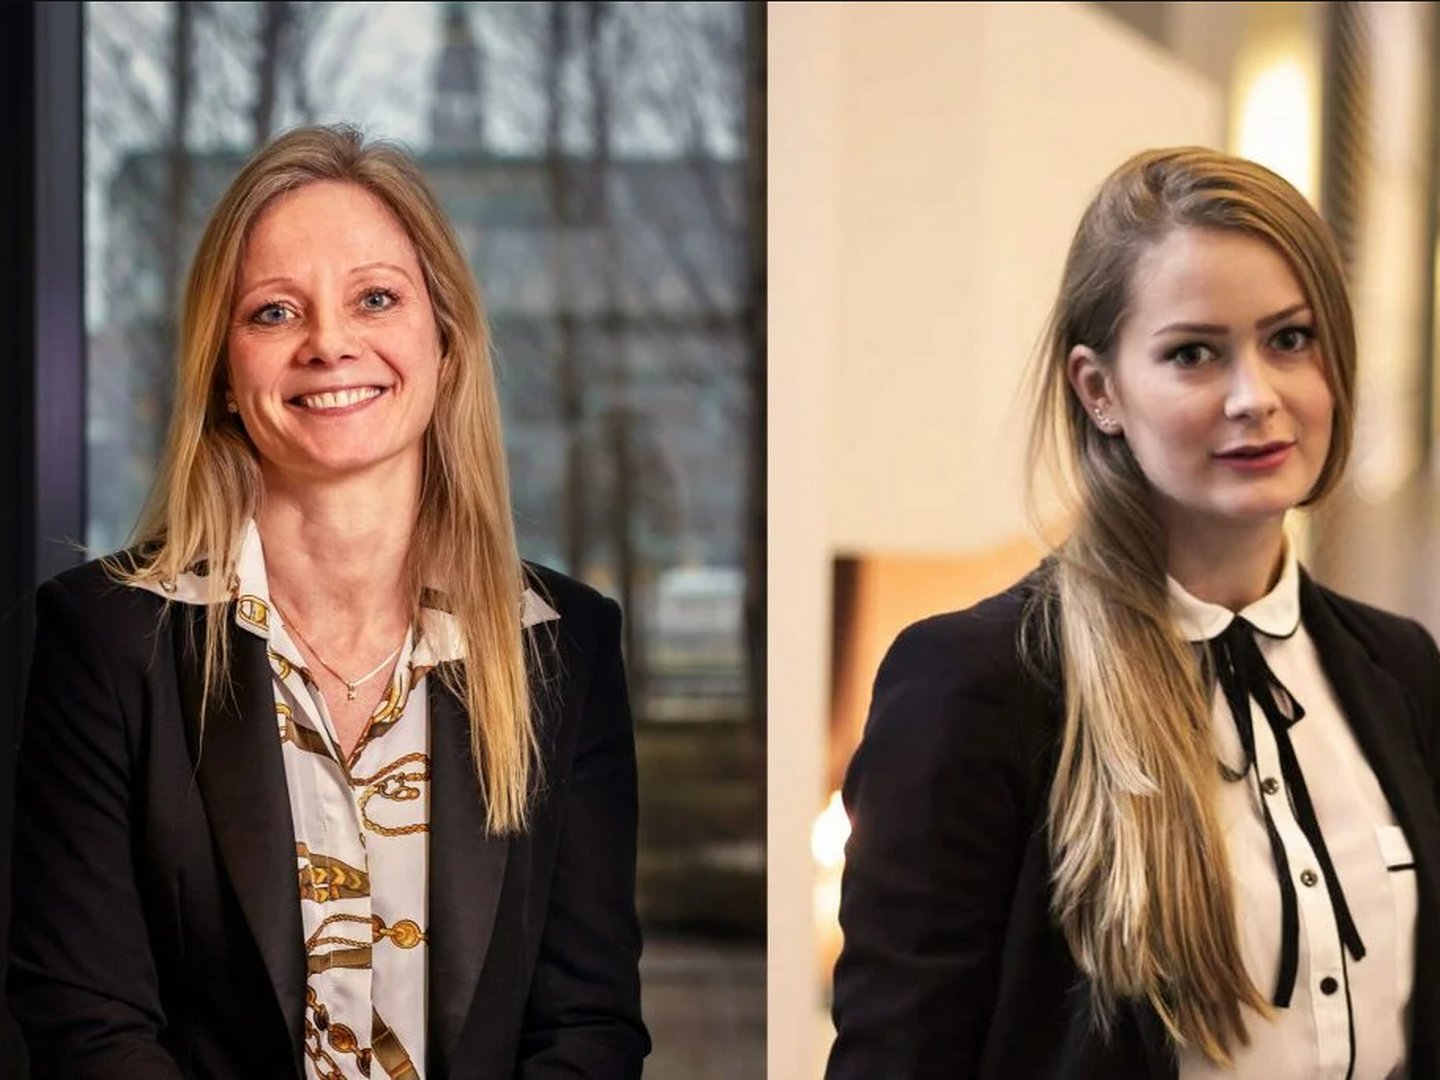 Portfolio managers Julie Bech and Audhild Aabø of the Nordea 1 Global Diversity Engagement Fund. | Photo: PR/Nordea